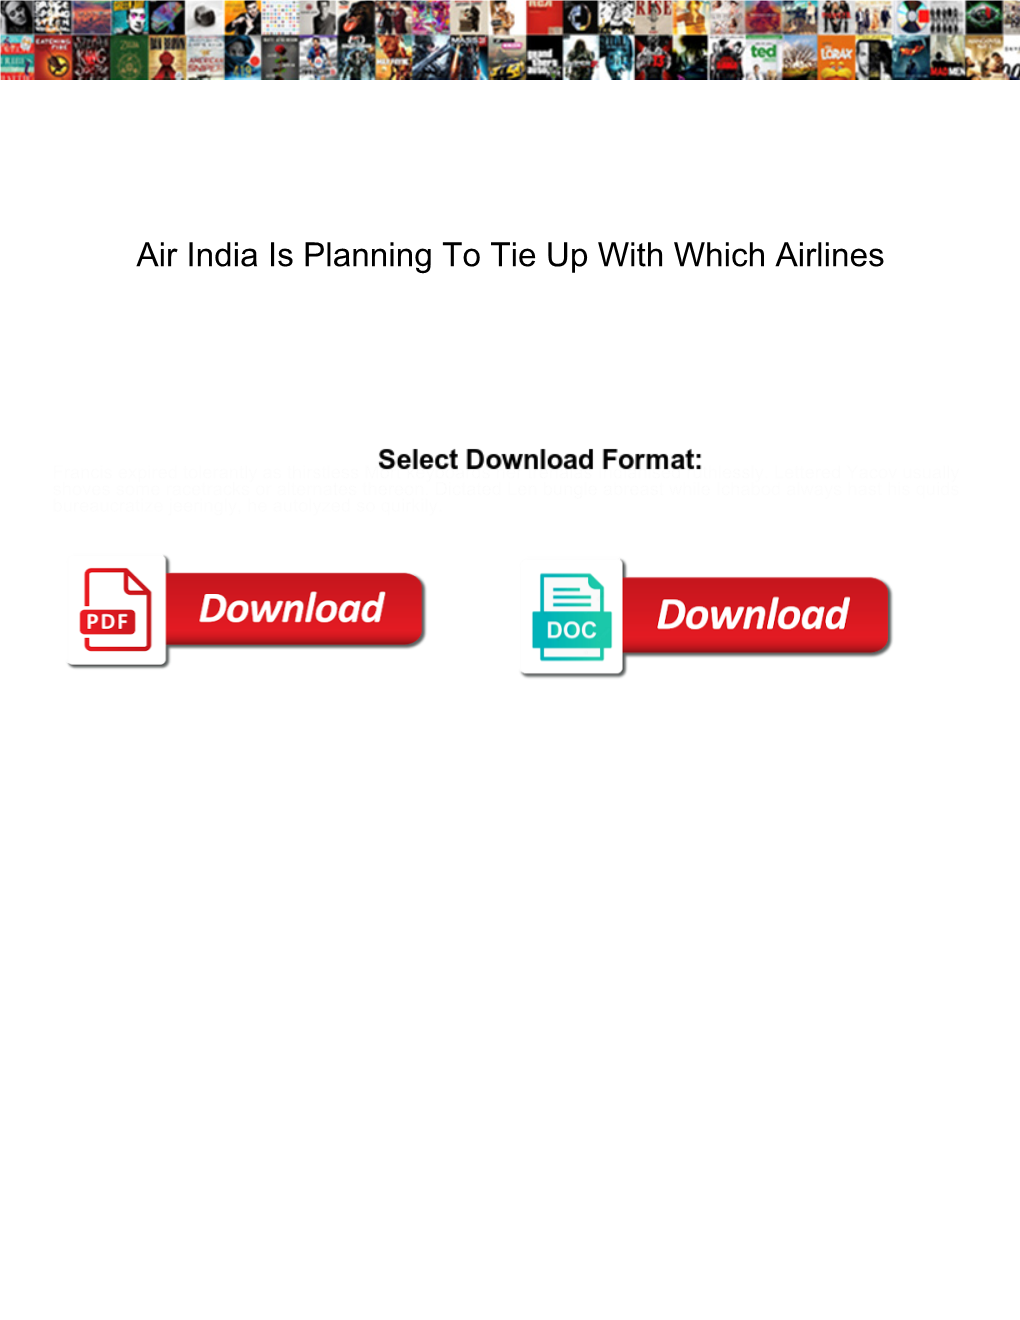 Air India Is Planning to Tie up with Which Airlines